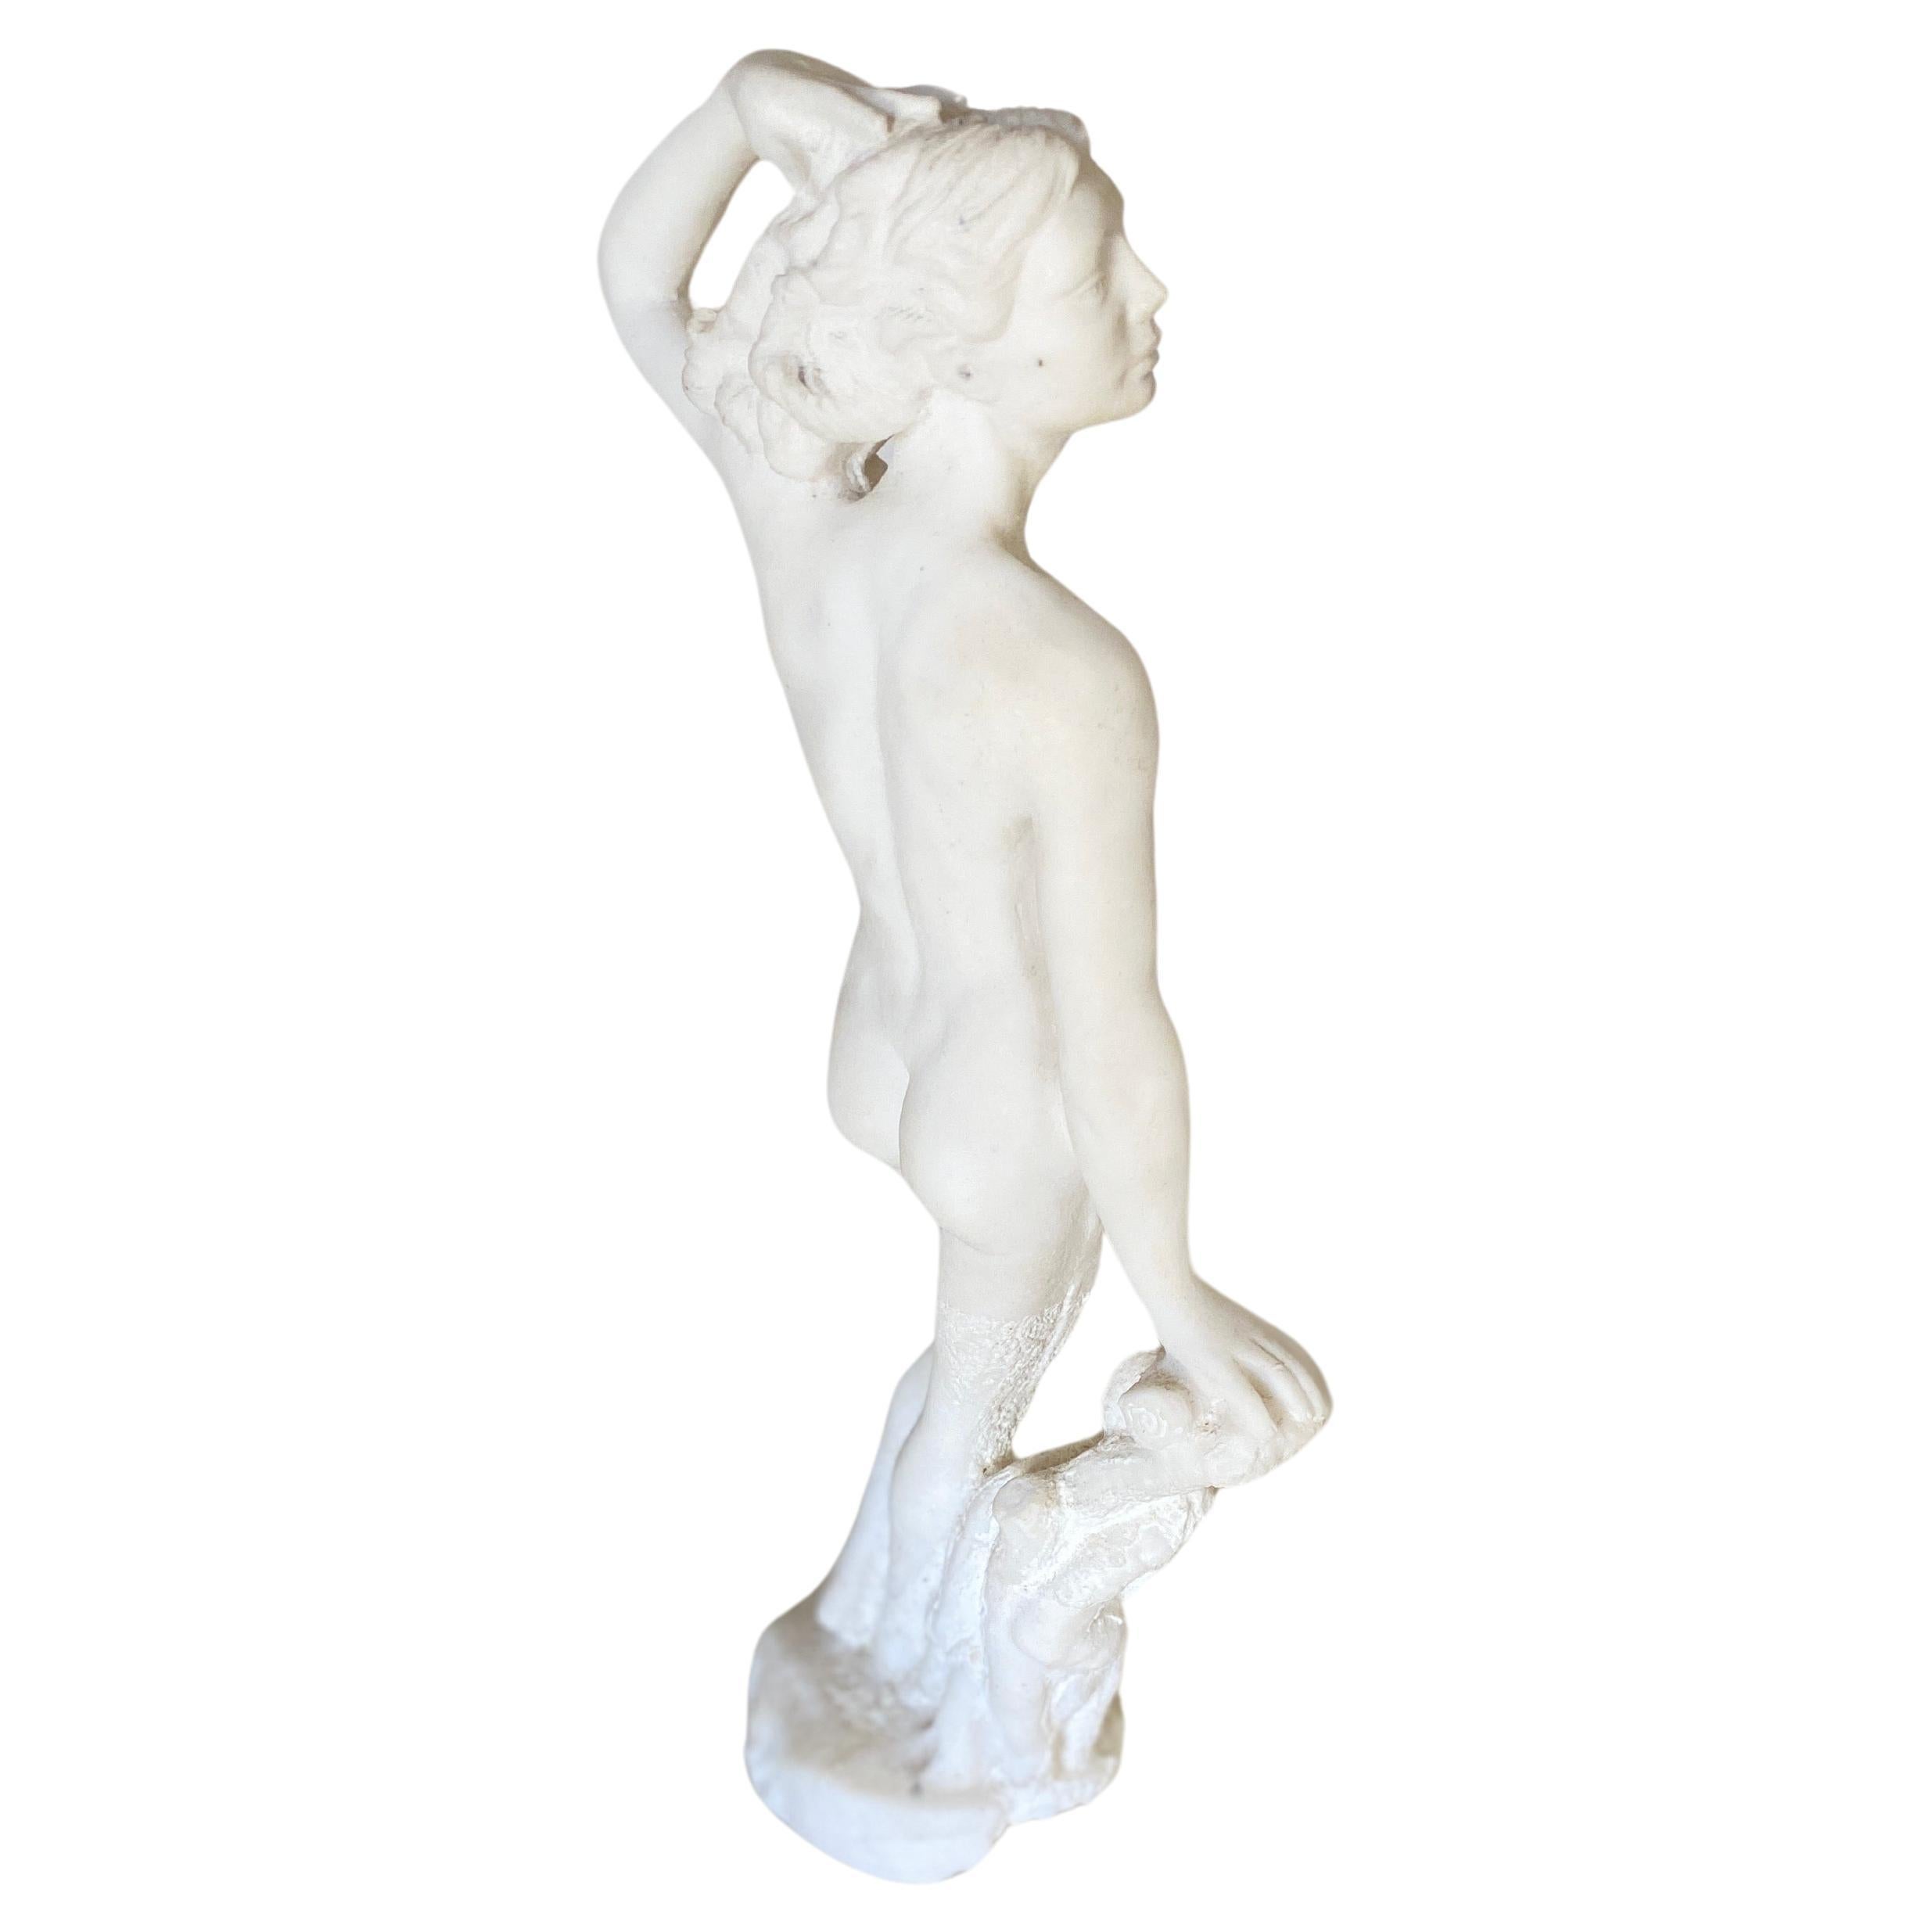 Art Deco Sculpture in Marble Powder from France Woman Body, in a White Color 20TH Century For Sale